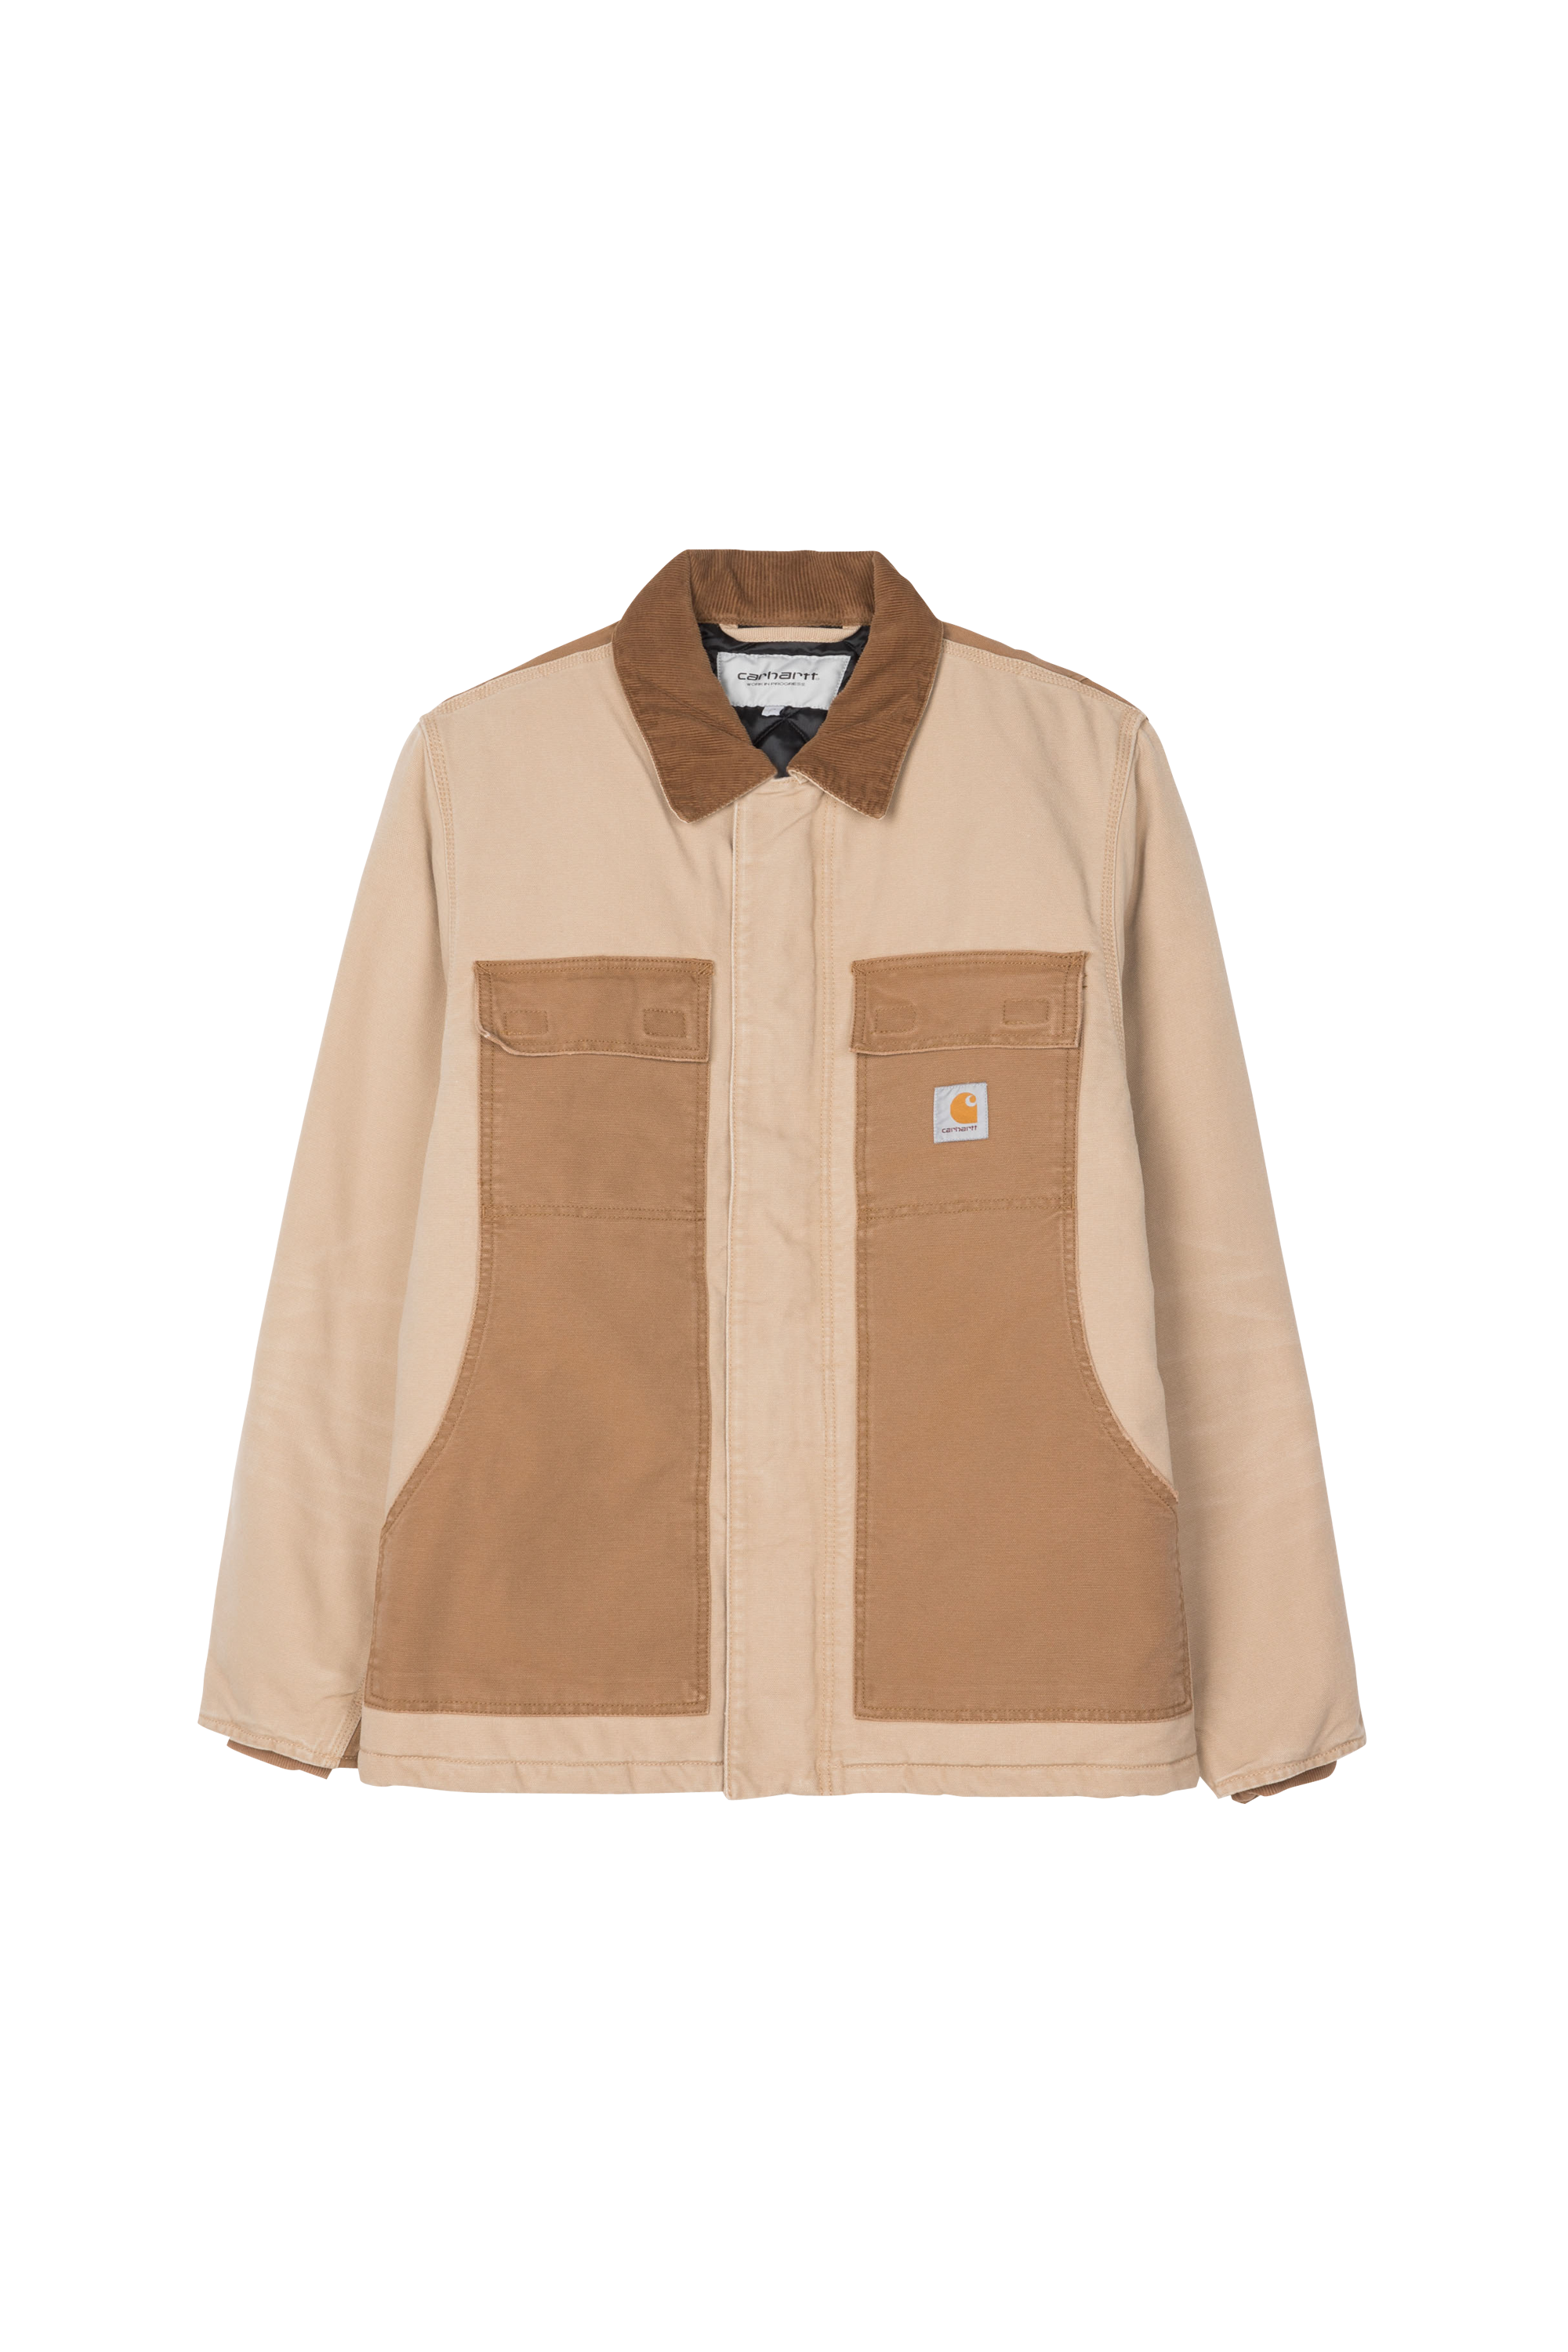 Carhartt Wip - Manteau - Taille XS